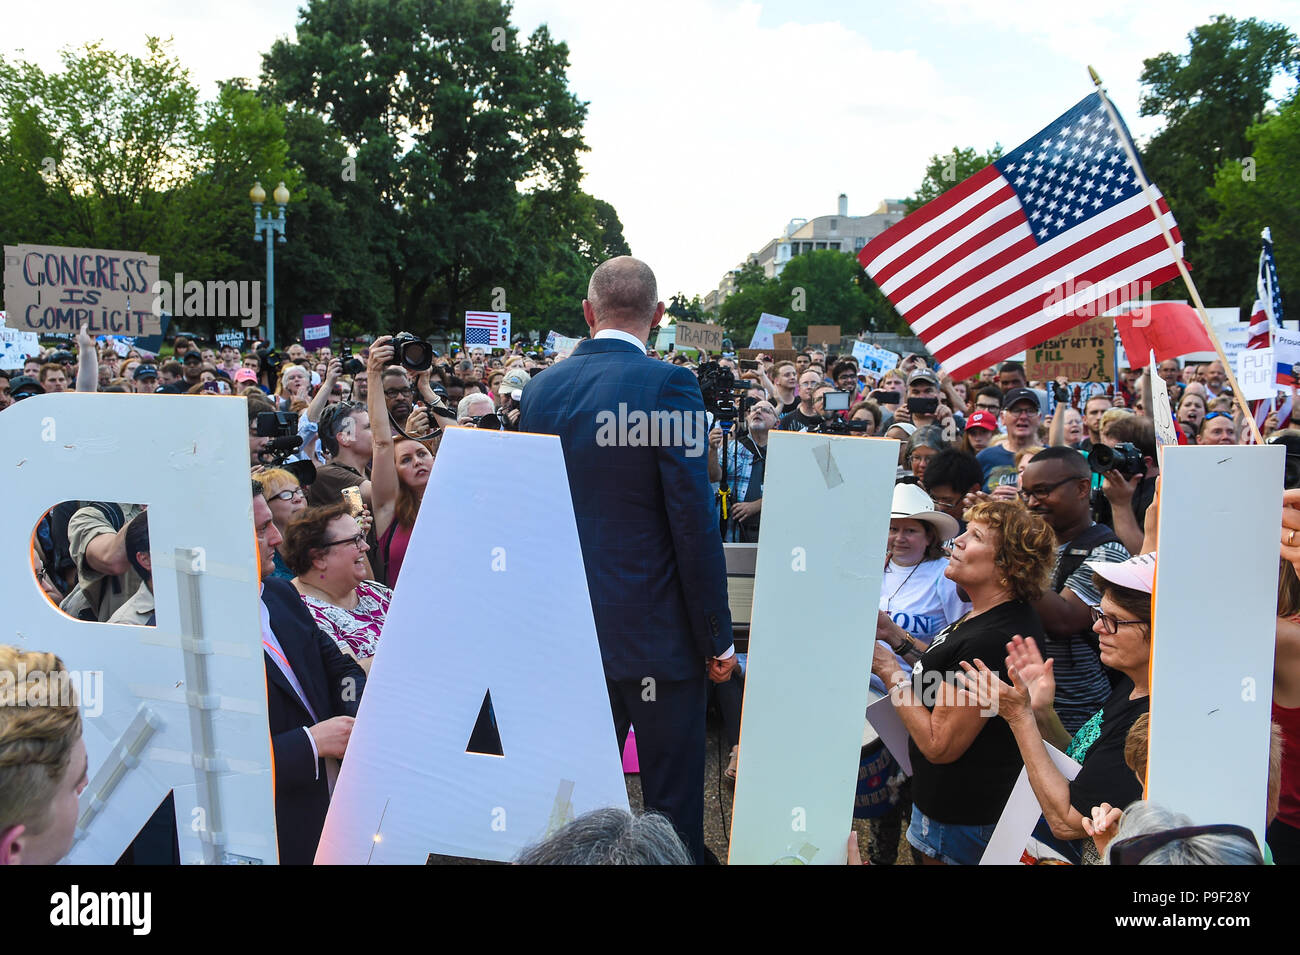 Washington DC, USA. 17th July 2018. Michael Avenatti speaks to the crowd at an event he organized during a protest in front of the White House, just two days after Donald Trump's gaffs in Helsinki, Finland with Vladimir Putin. Credit: Cal Sport Media/Alamy Live News Stock Photo